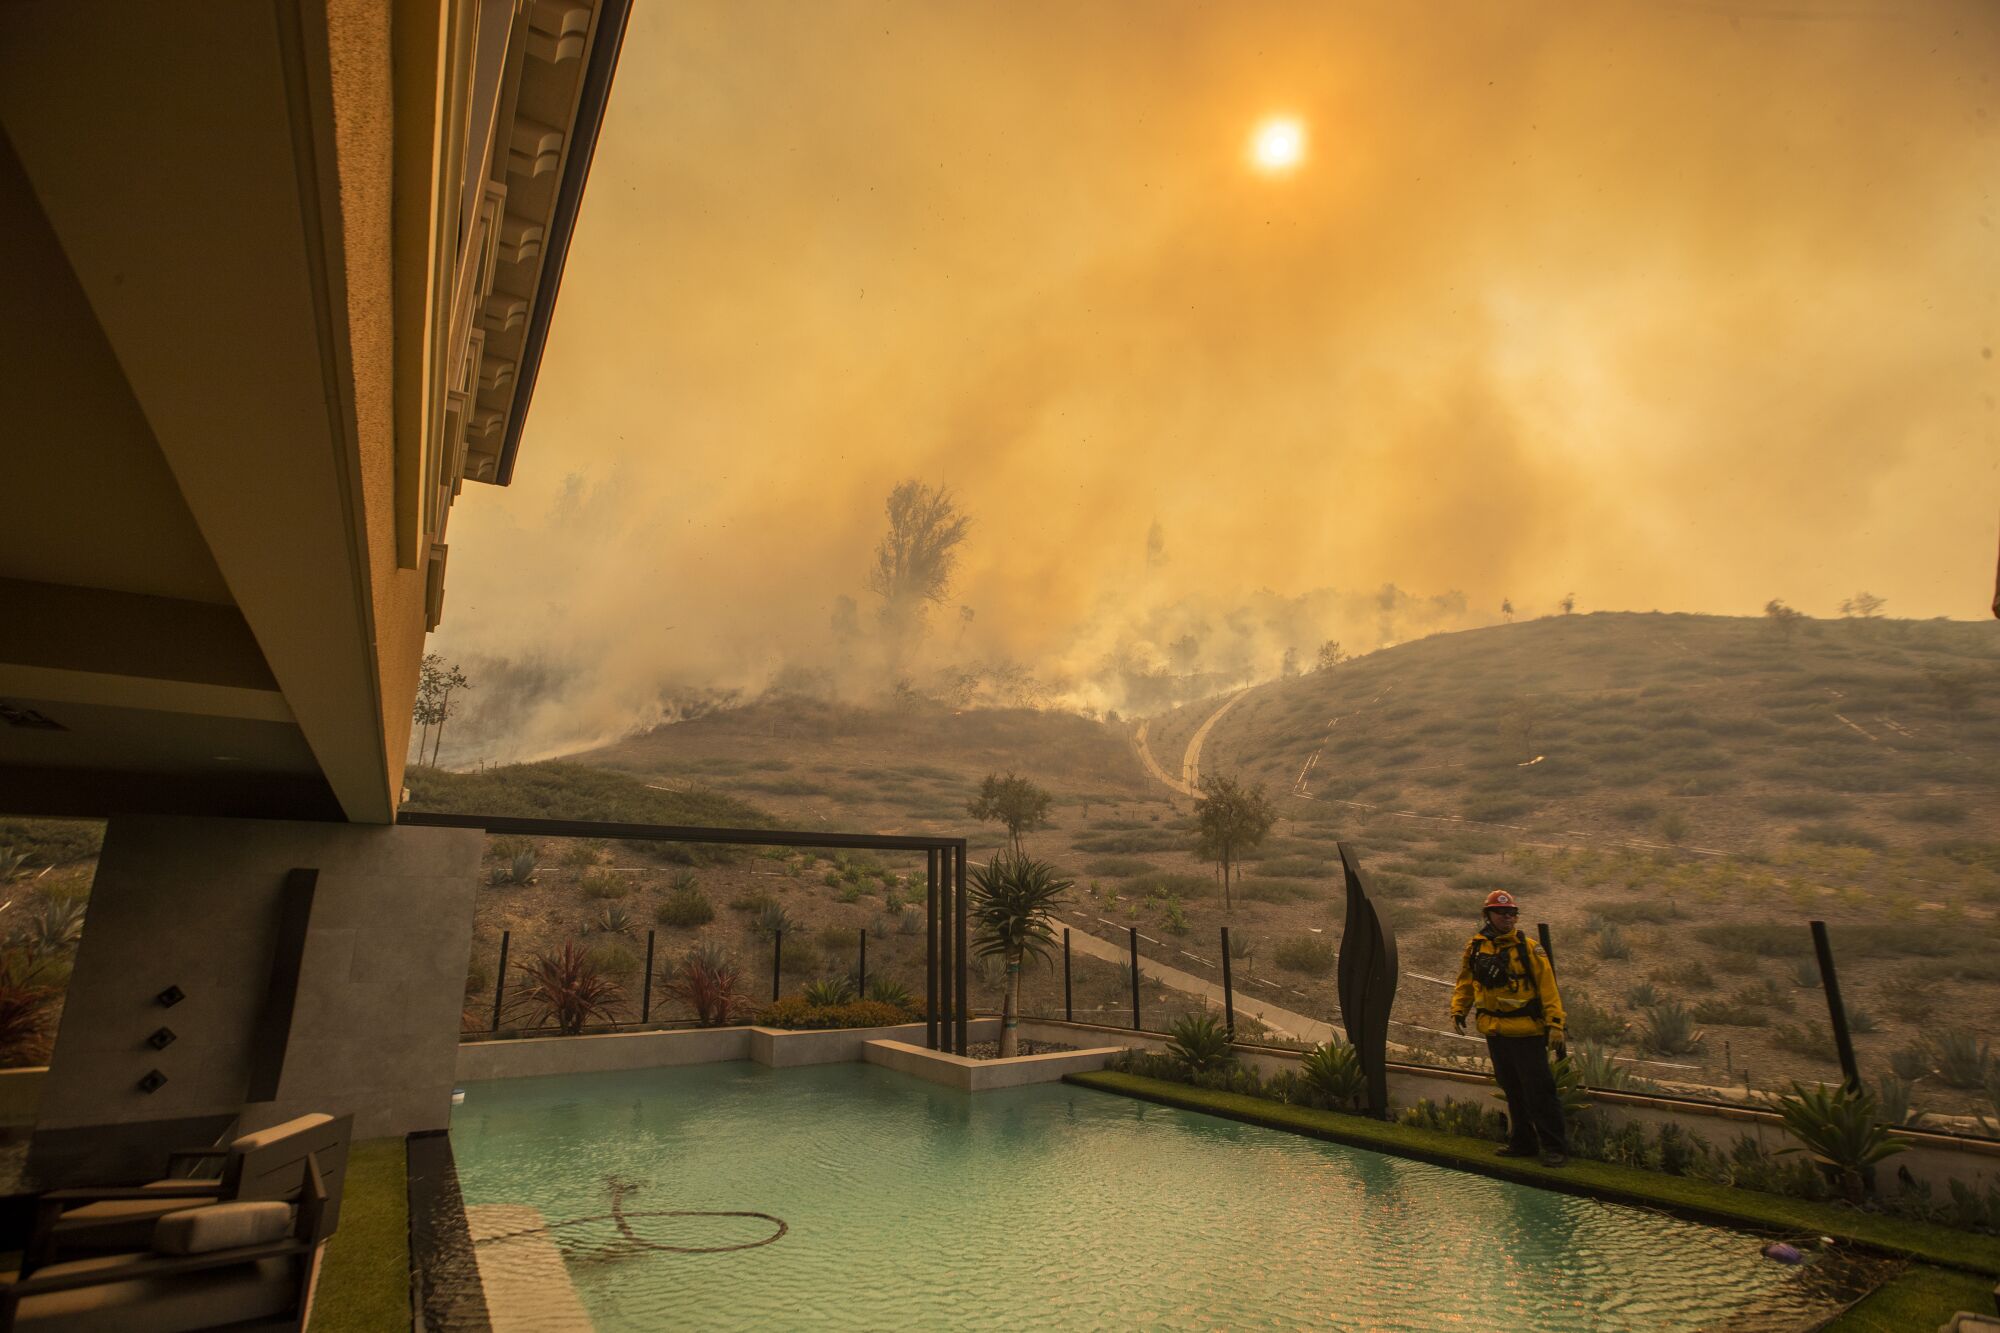 The Silverado fire burns close to a home Monday in Irvine's Orchard Hills neighborhood.